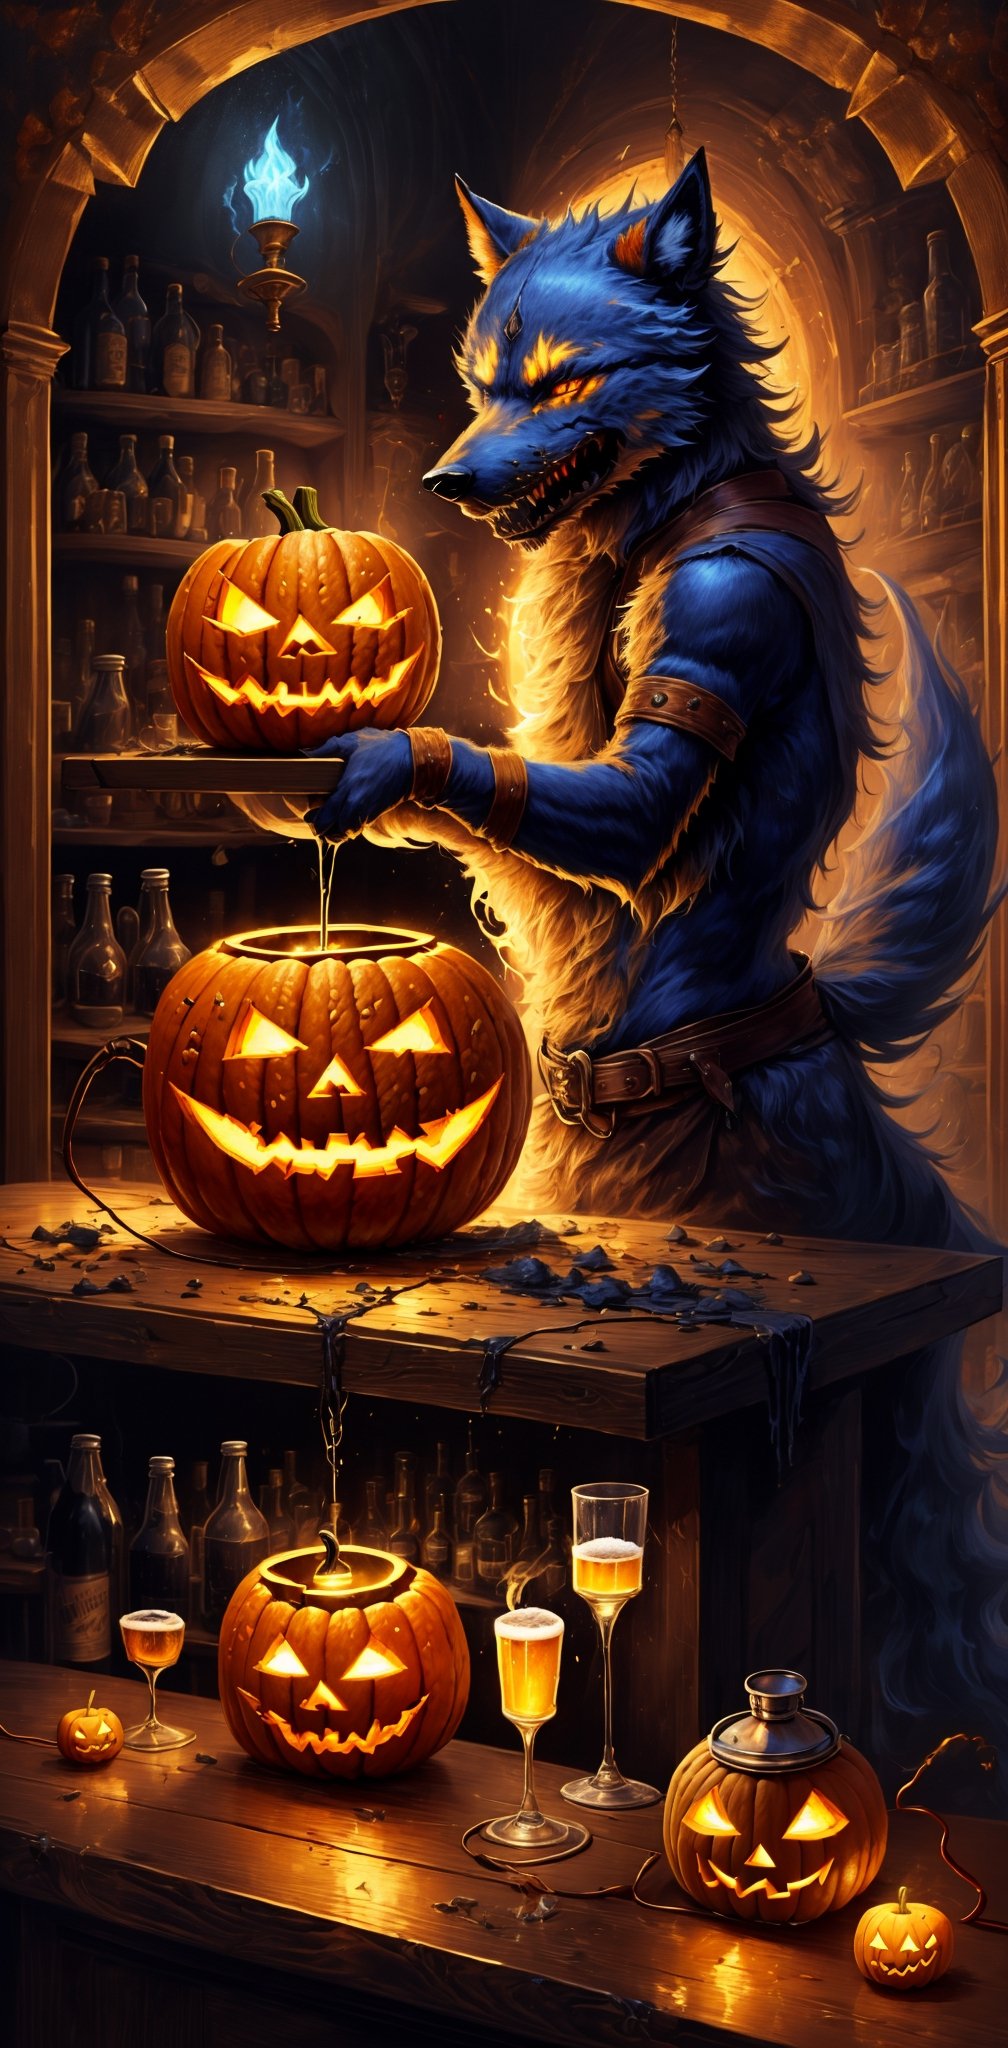 werewolves drinking beer on the bar, with jack-o lantern lamp, dim light, horor themes